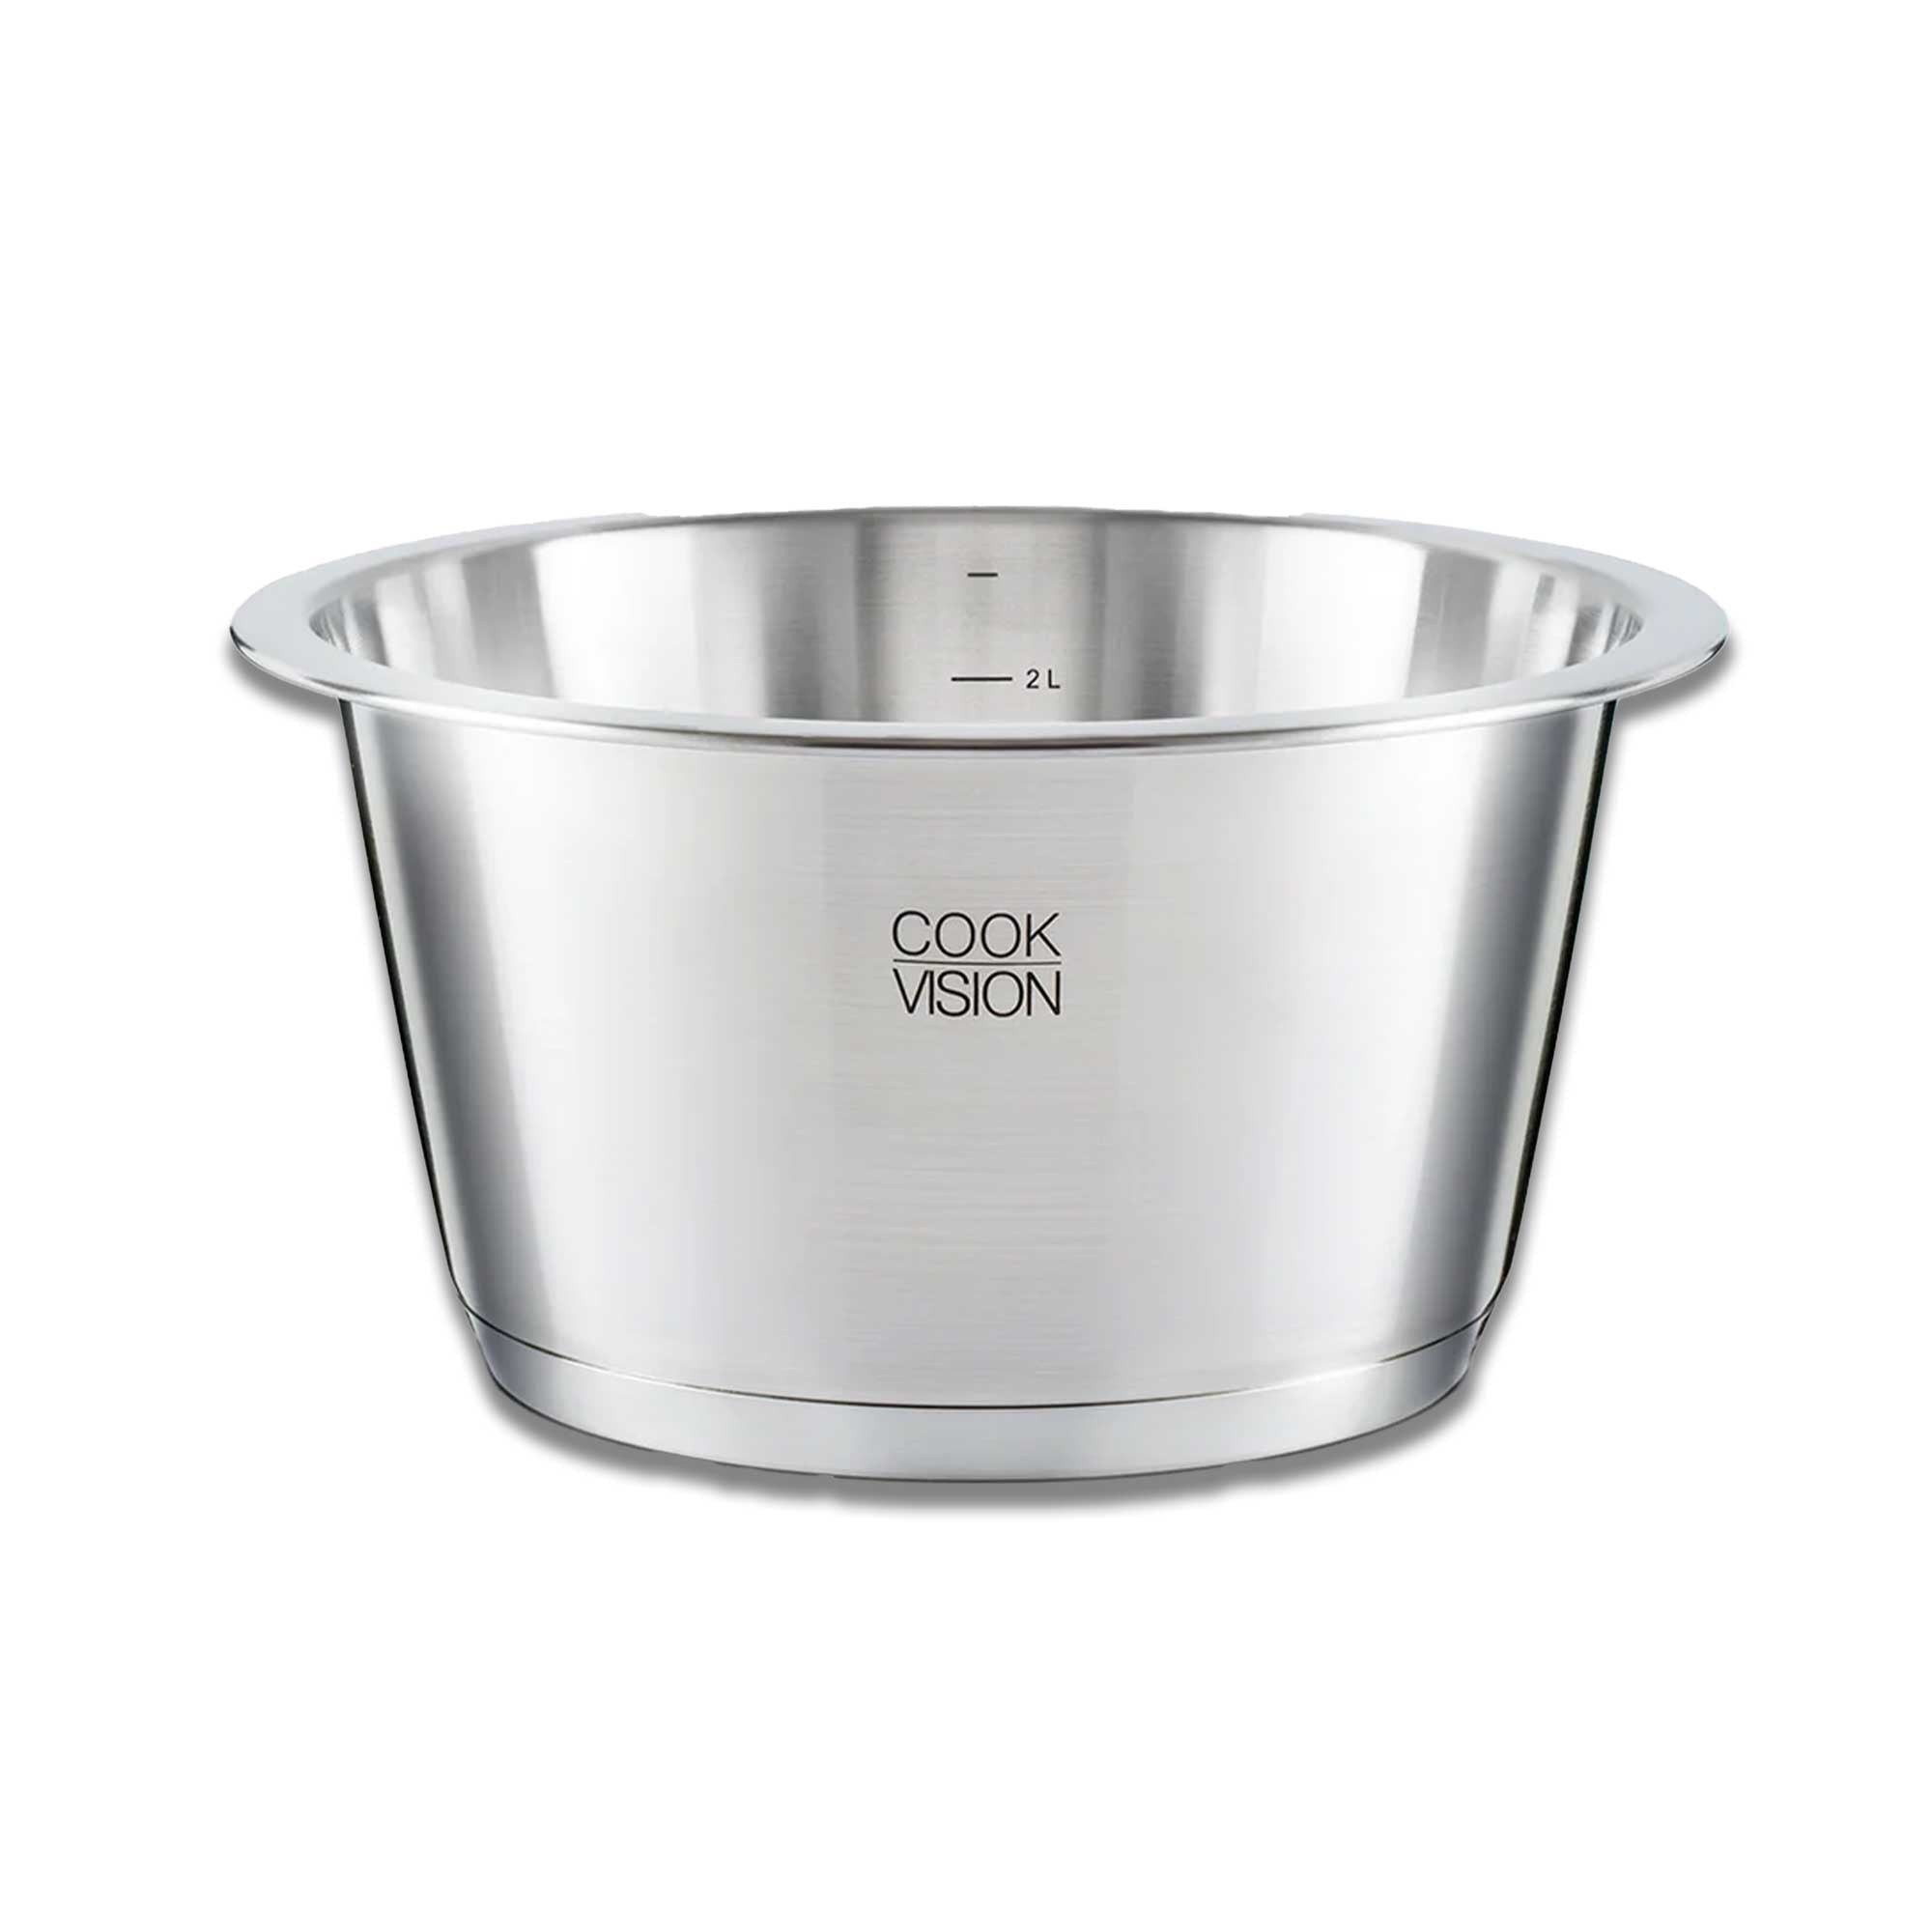 CookVision stainless steel pots